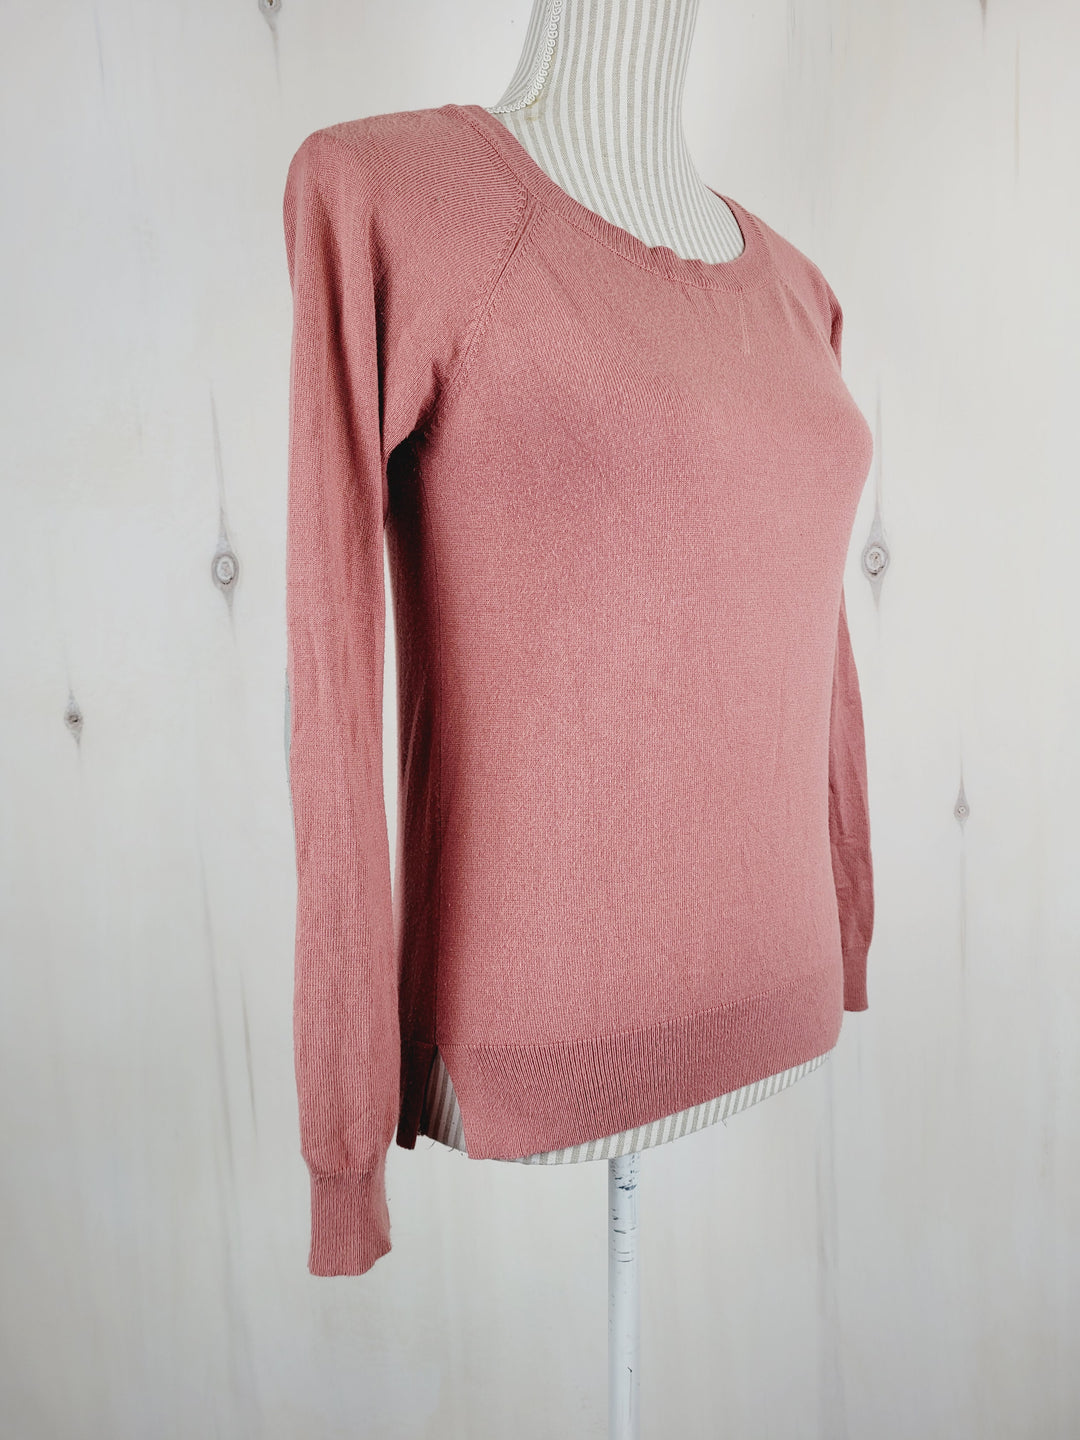 PINK MARTINI MUTED PINK SWEATER WITH ELBOW PATCHES LADIES XS EUC